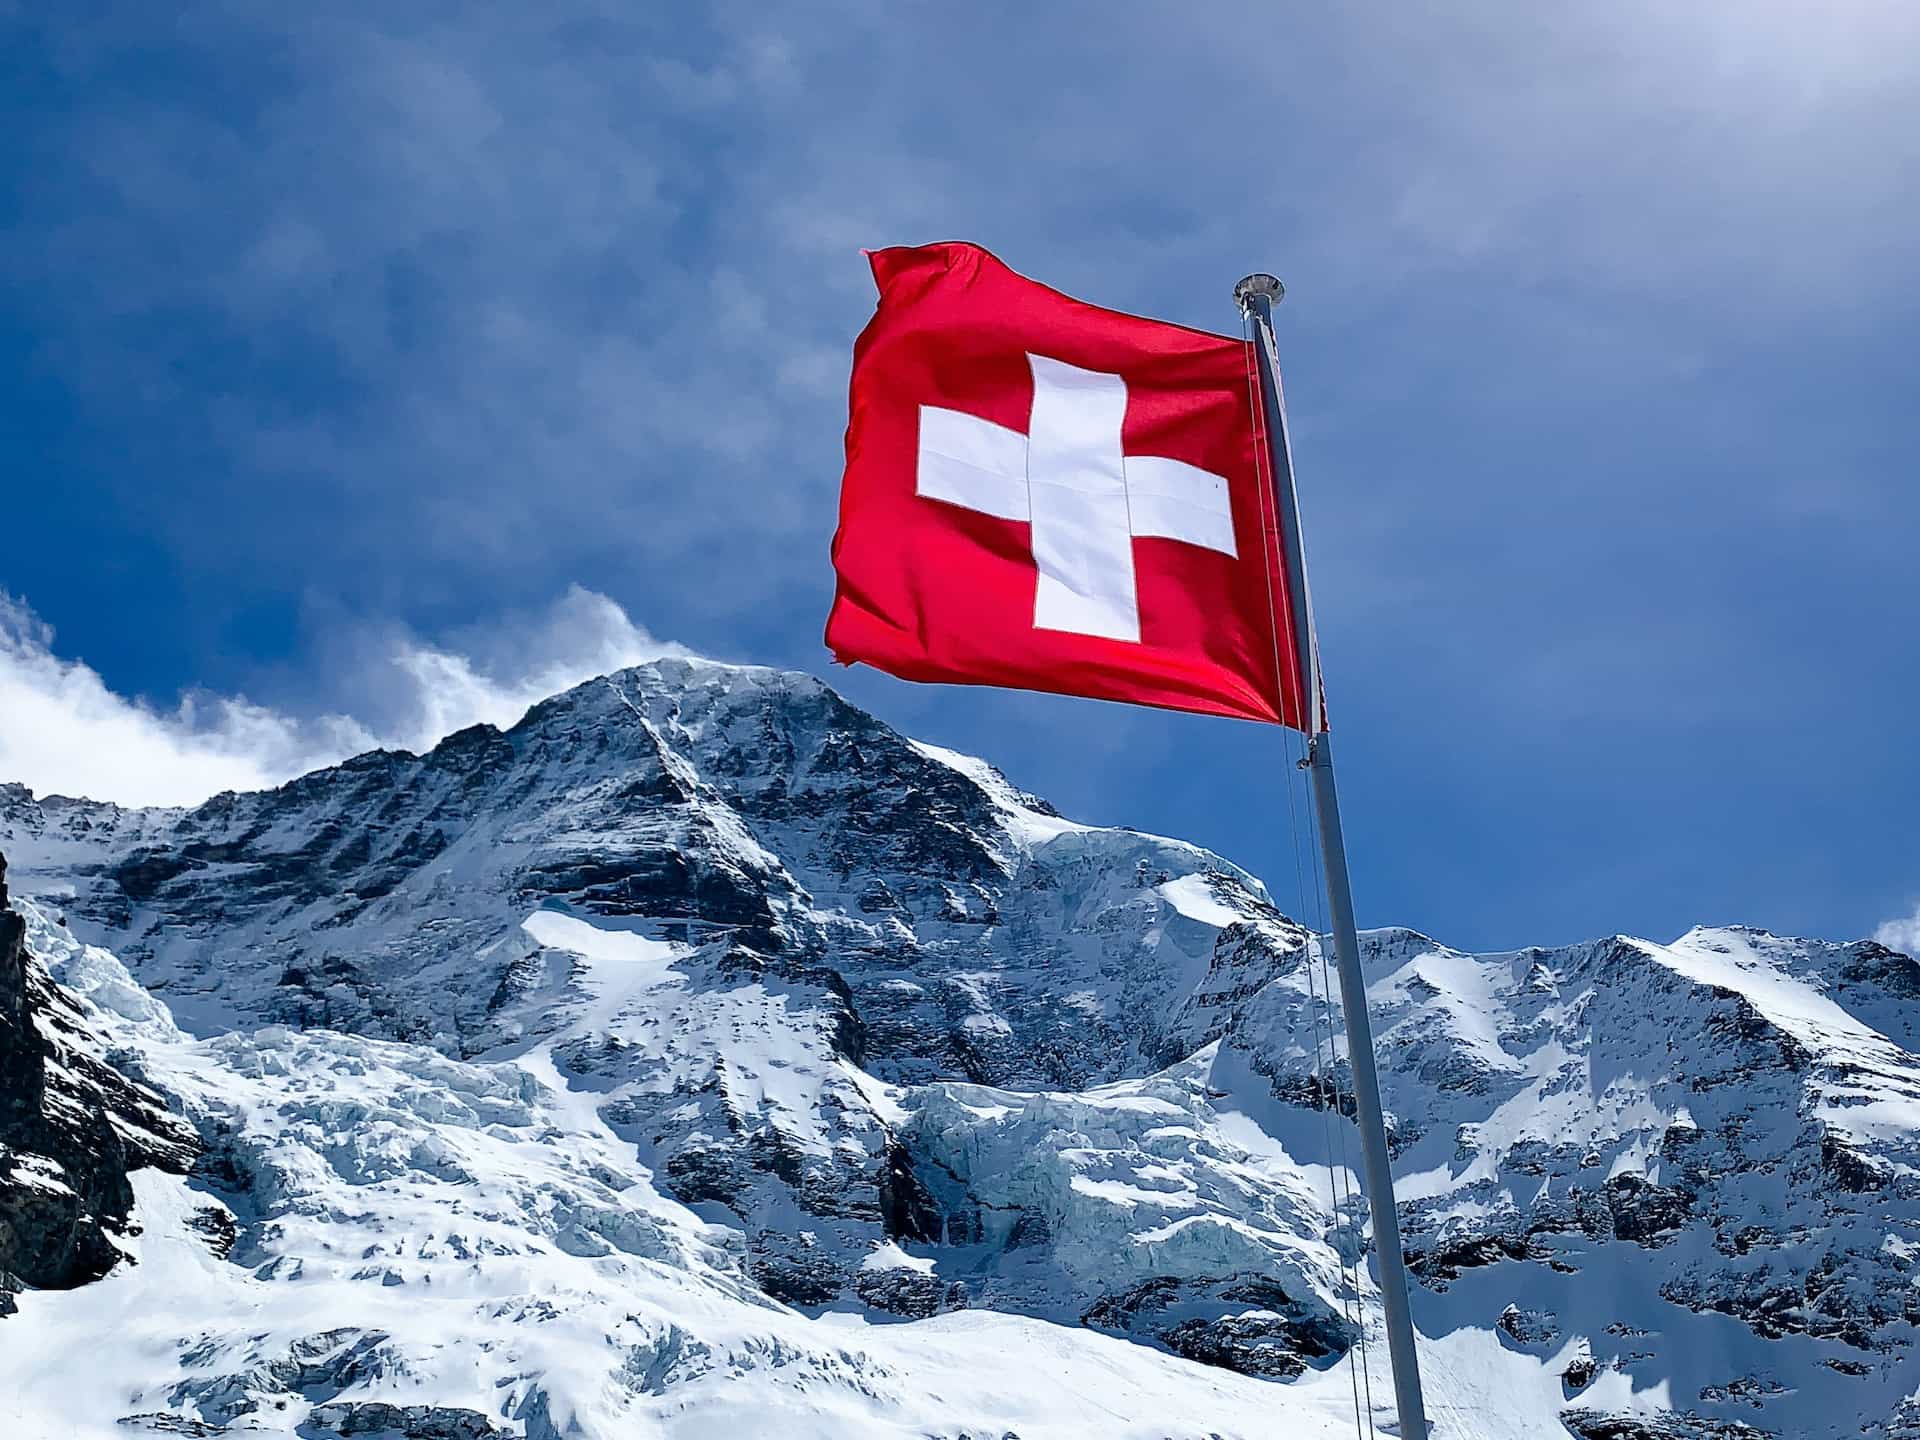 A red flag with a white cross hoisted near a snowy peak